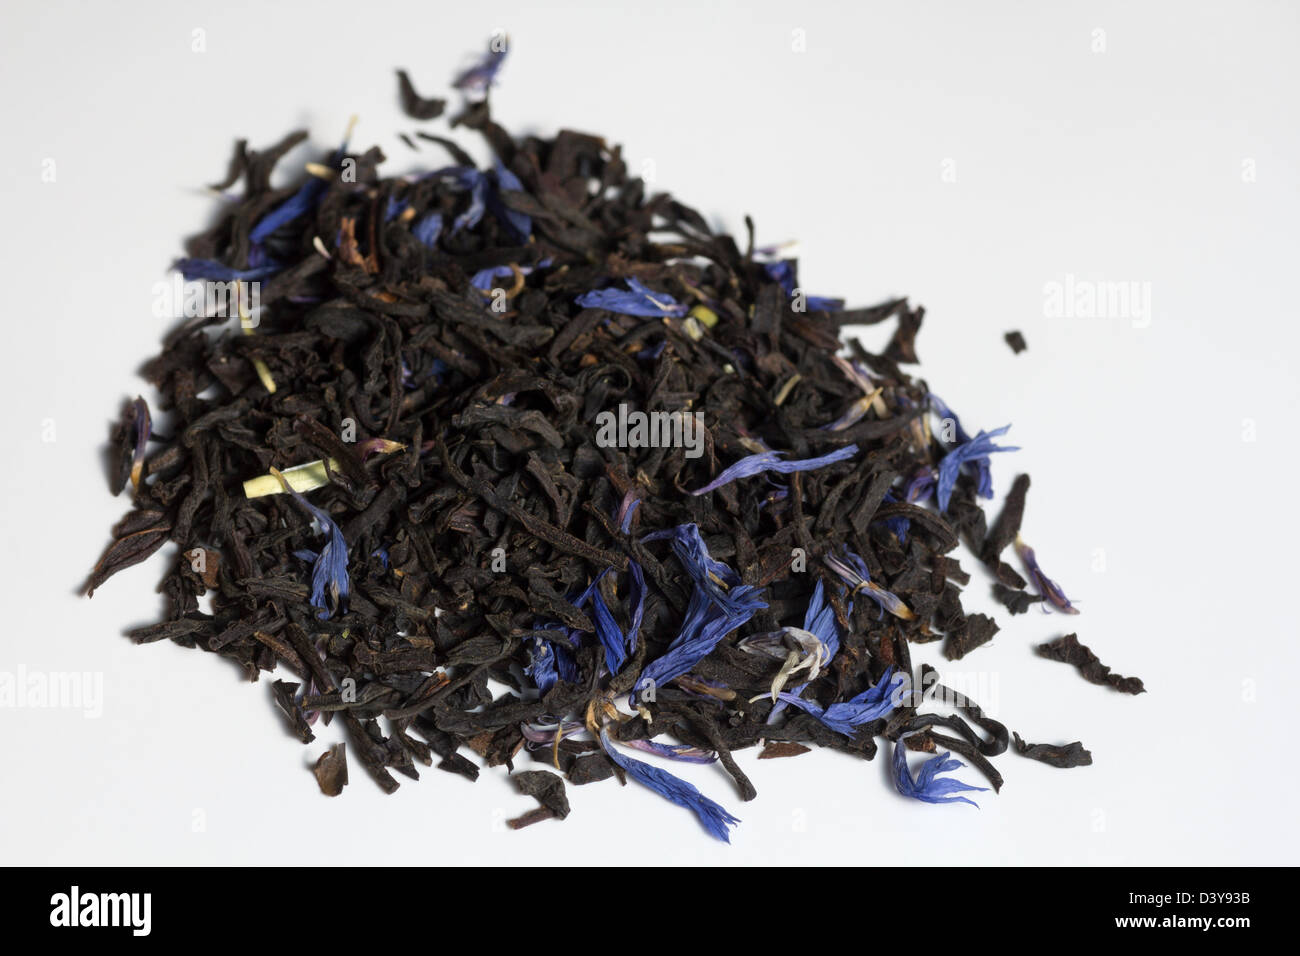 mariage freres earl grey french blue